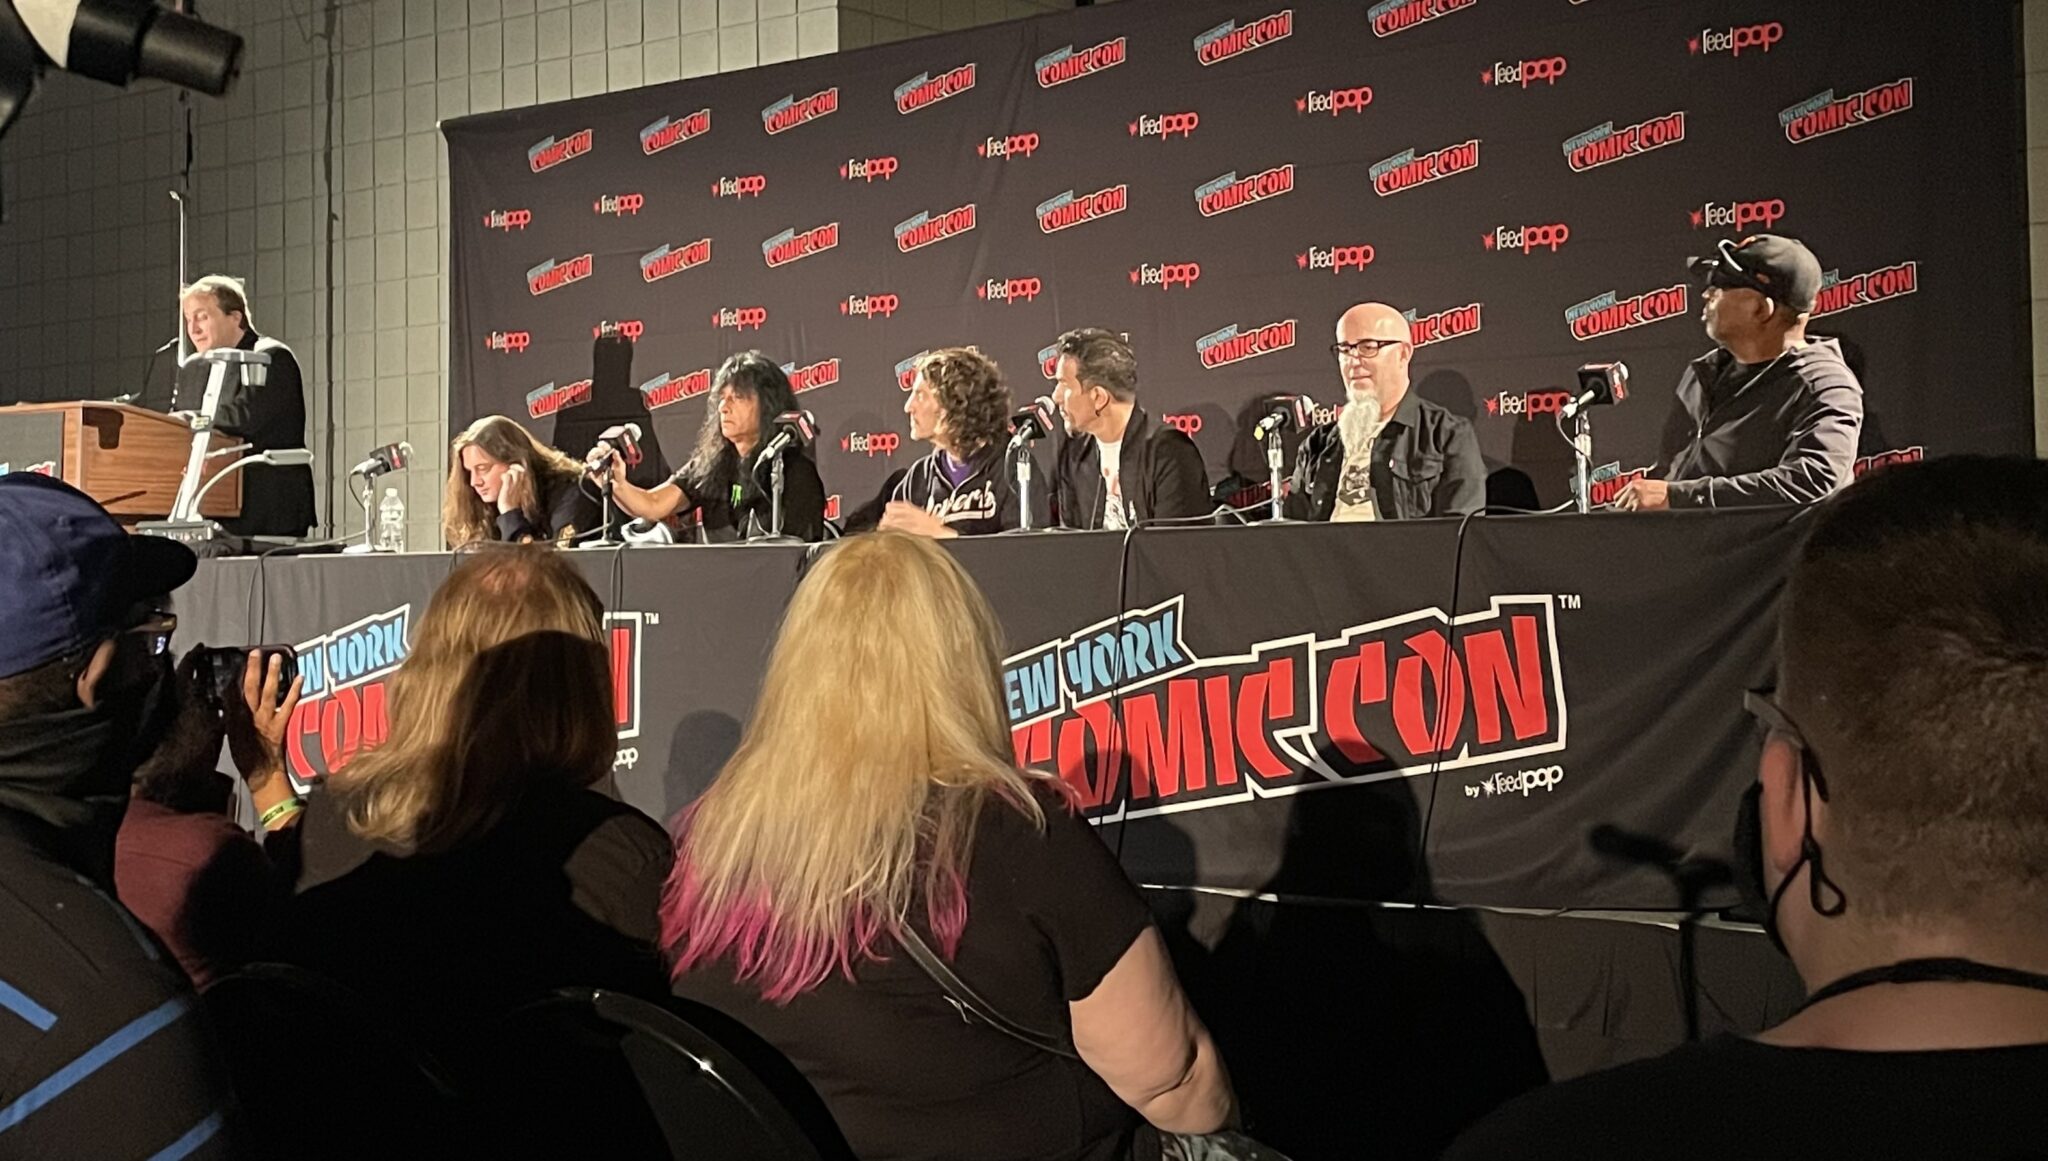 Anthrax and Chuck D sitting at a table at New York Comic Con discussing comics.